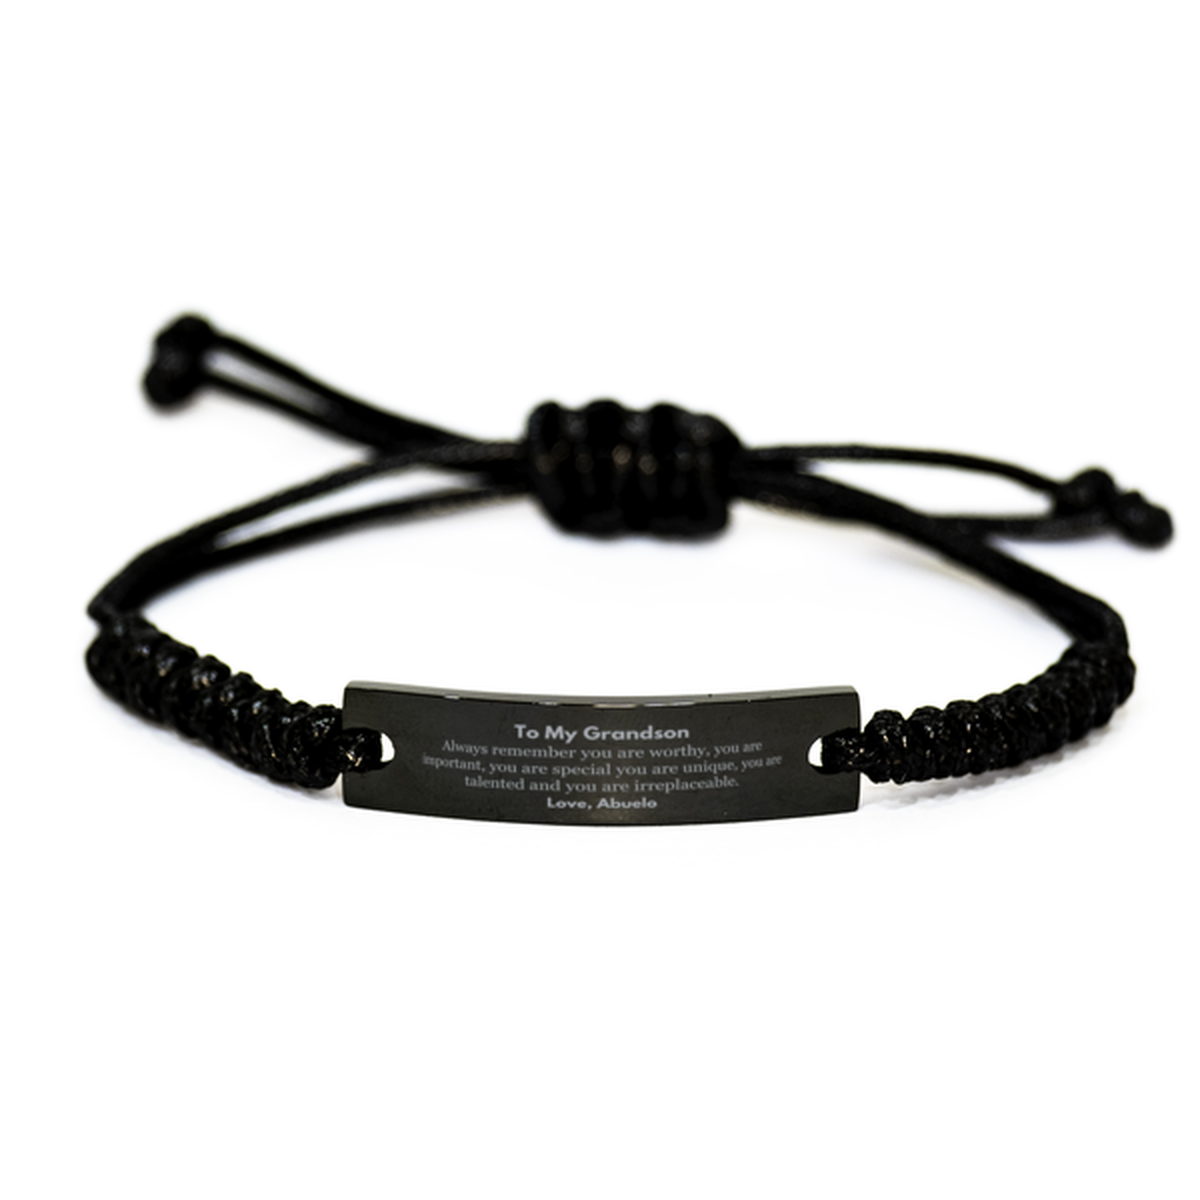 Grandson Birthday Gifts from Abuelo, Inspirational Black Rope Bracelet for Grandson Christmas Graduation Gifts for Grandson Always remember you are worthy, you are important. Love, Abuelo